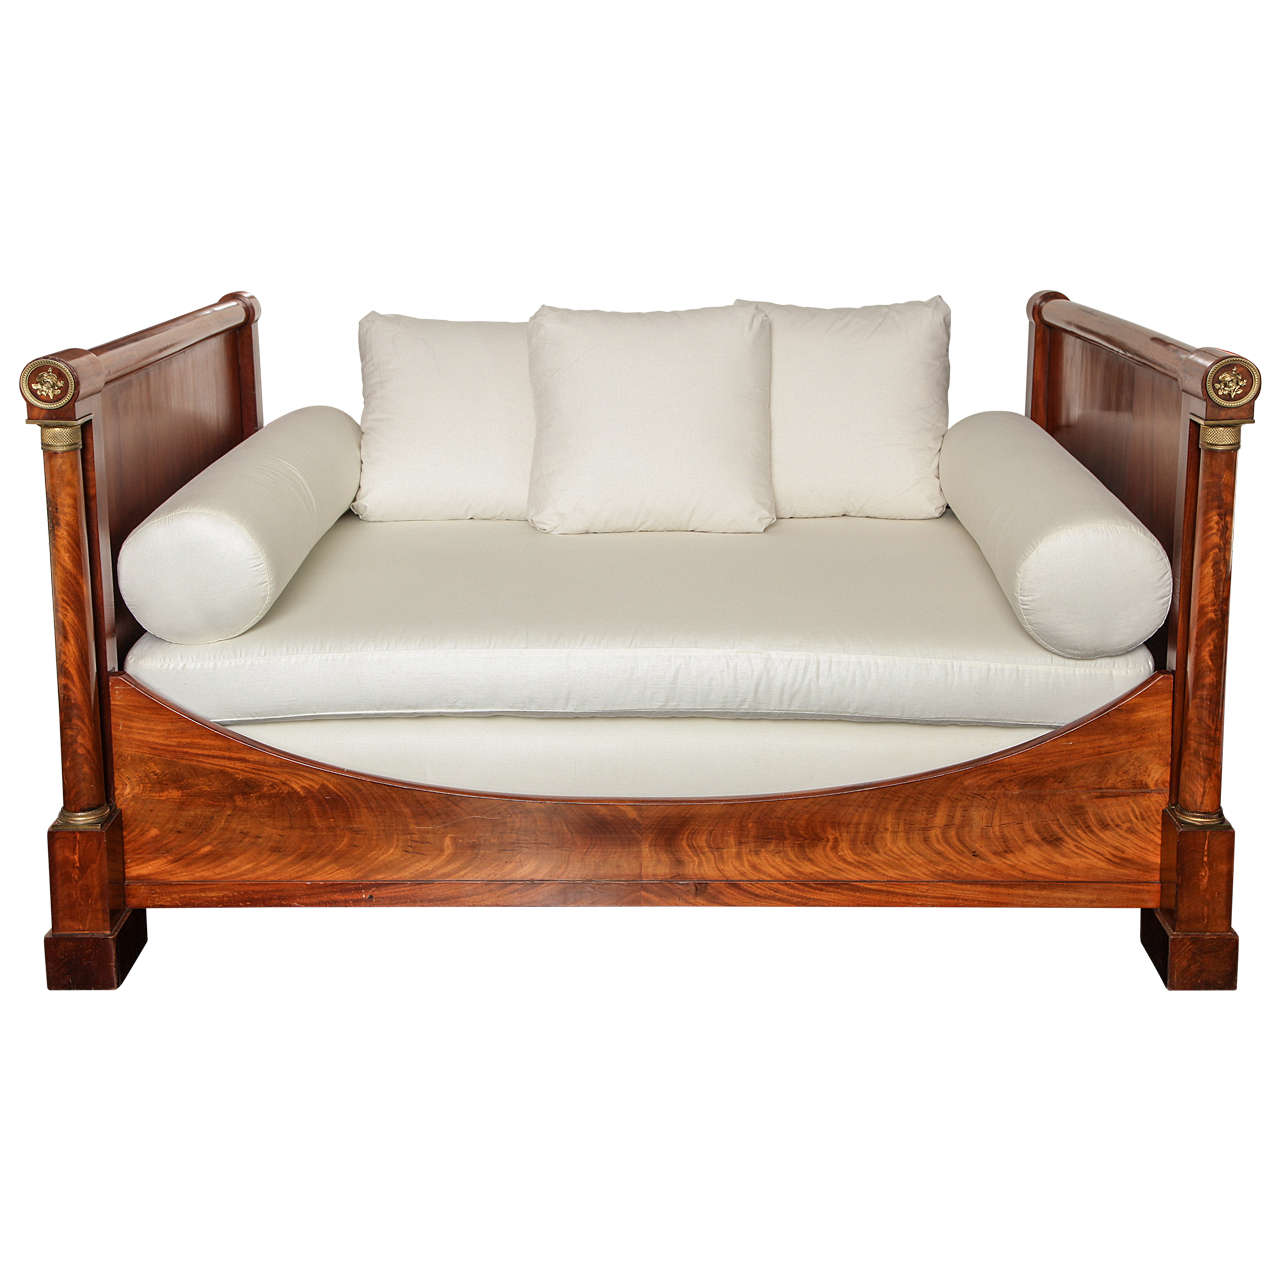 19th Century Empire Mahogany Daybed For Sale